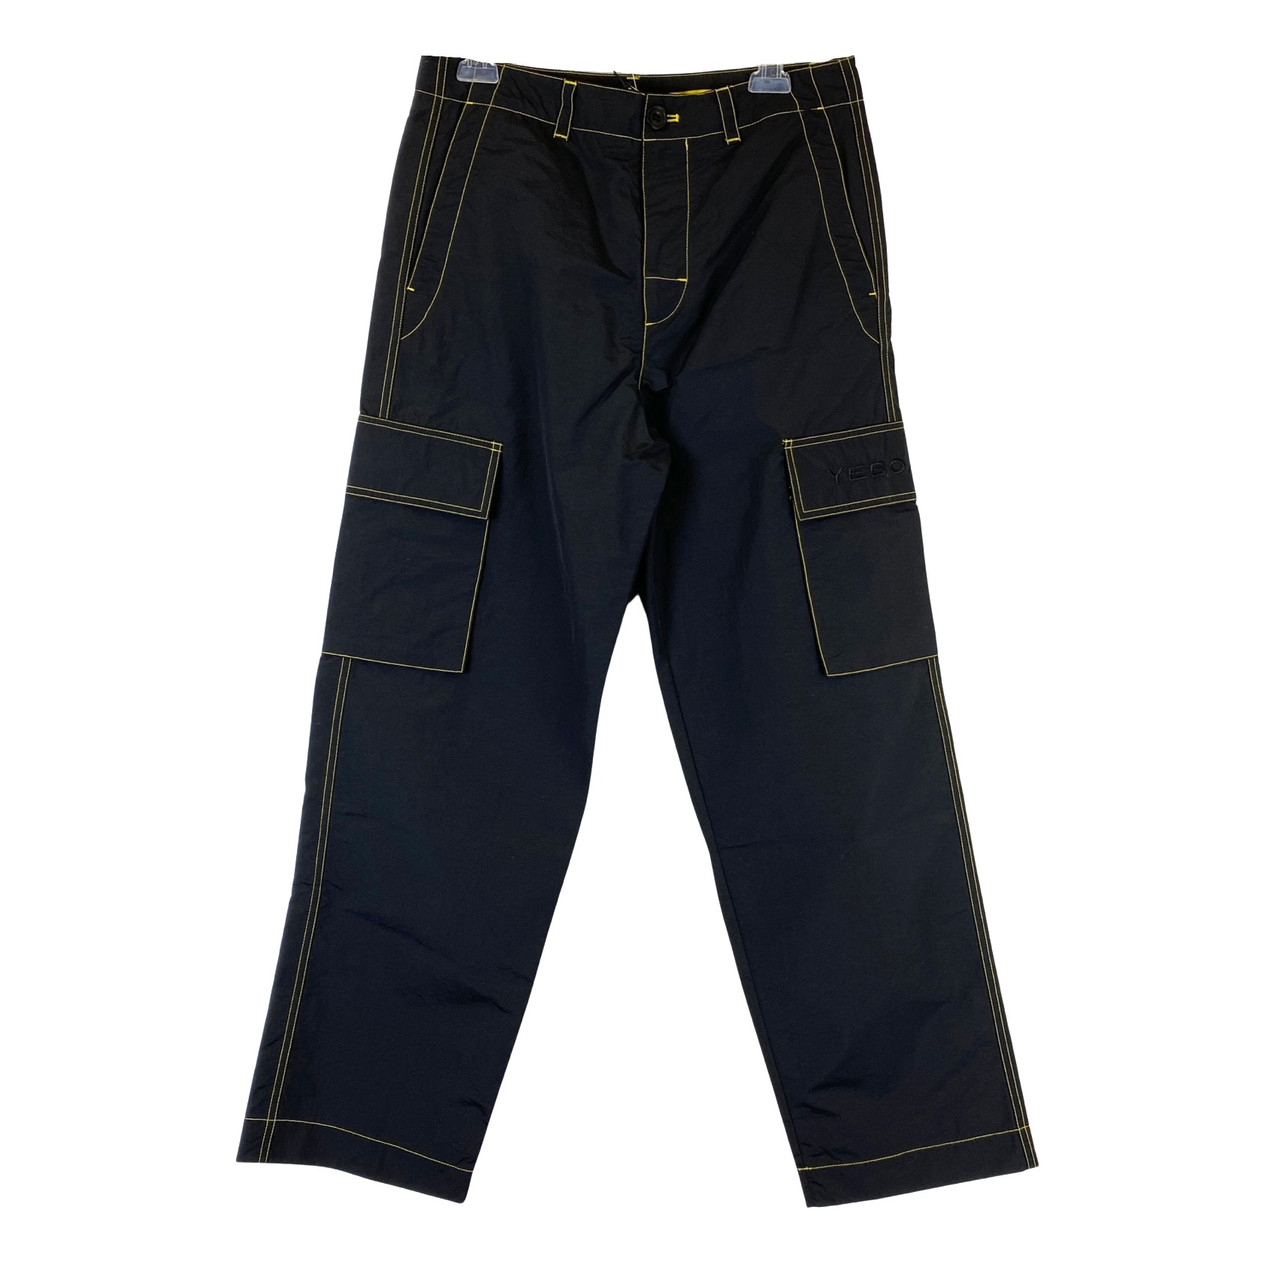 Cargo pants | Bottom-wear | The Seed Store